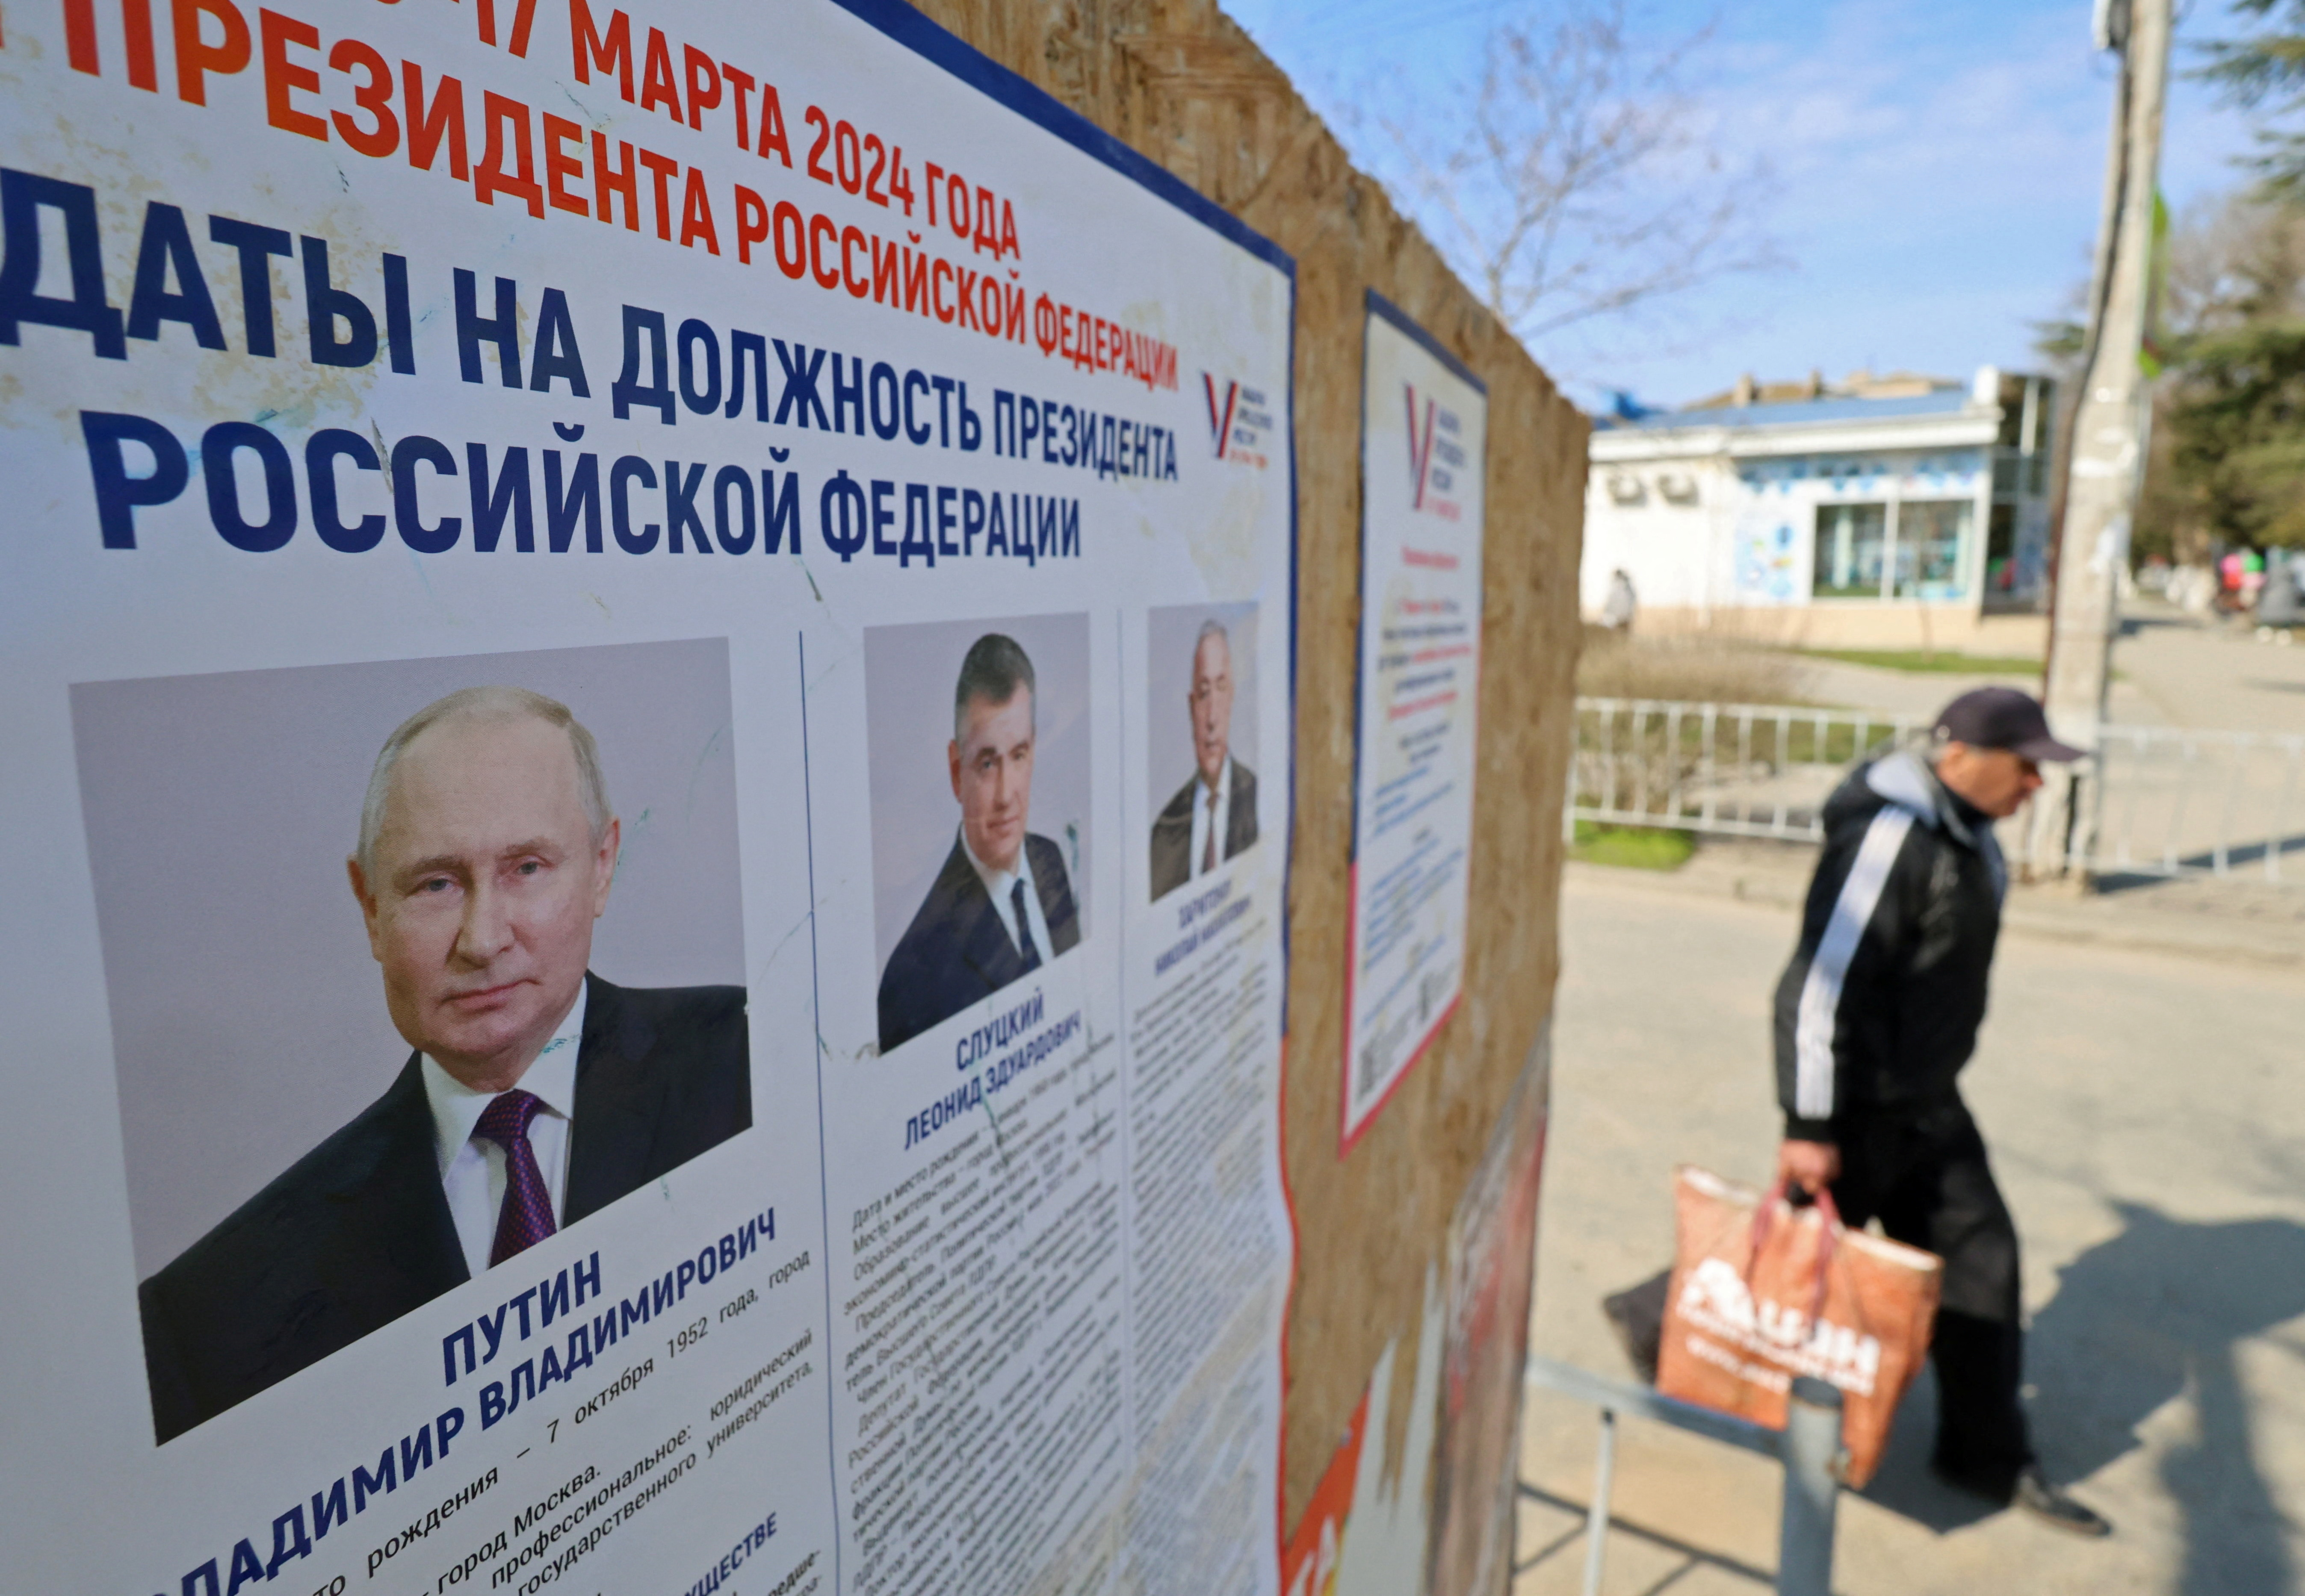 A man walks past an information board with portraits of Russian presidential candidates in the upcoming election in Yevpatoriya